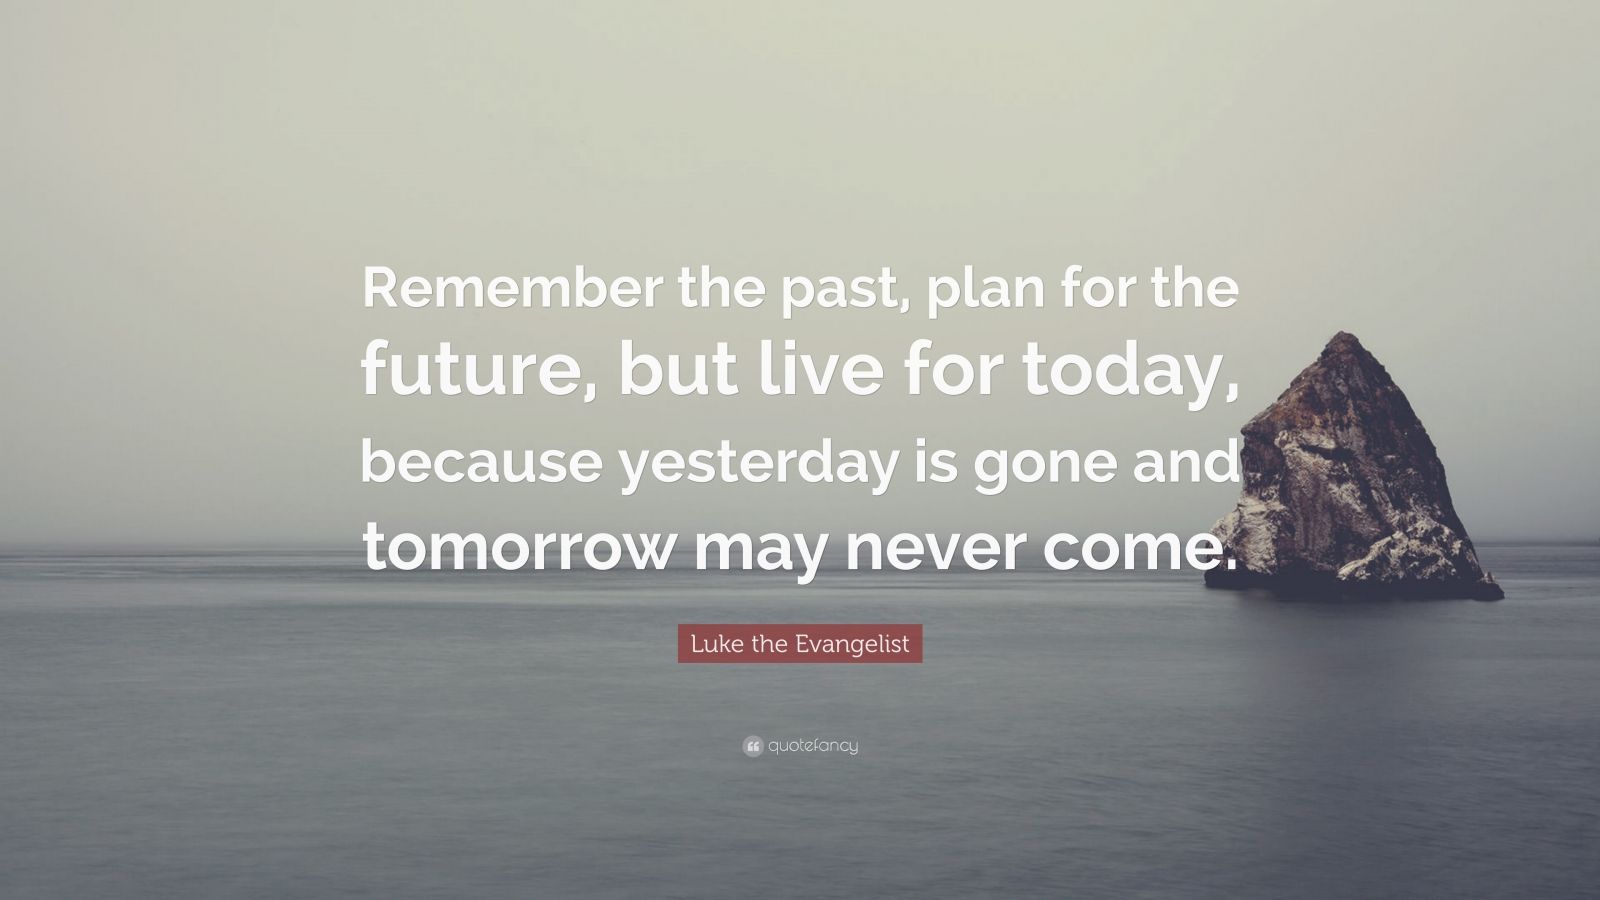 Luke the Evangelist Quote: “Remember the past, plan for the future, but ...